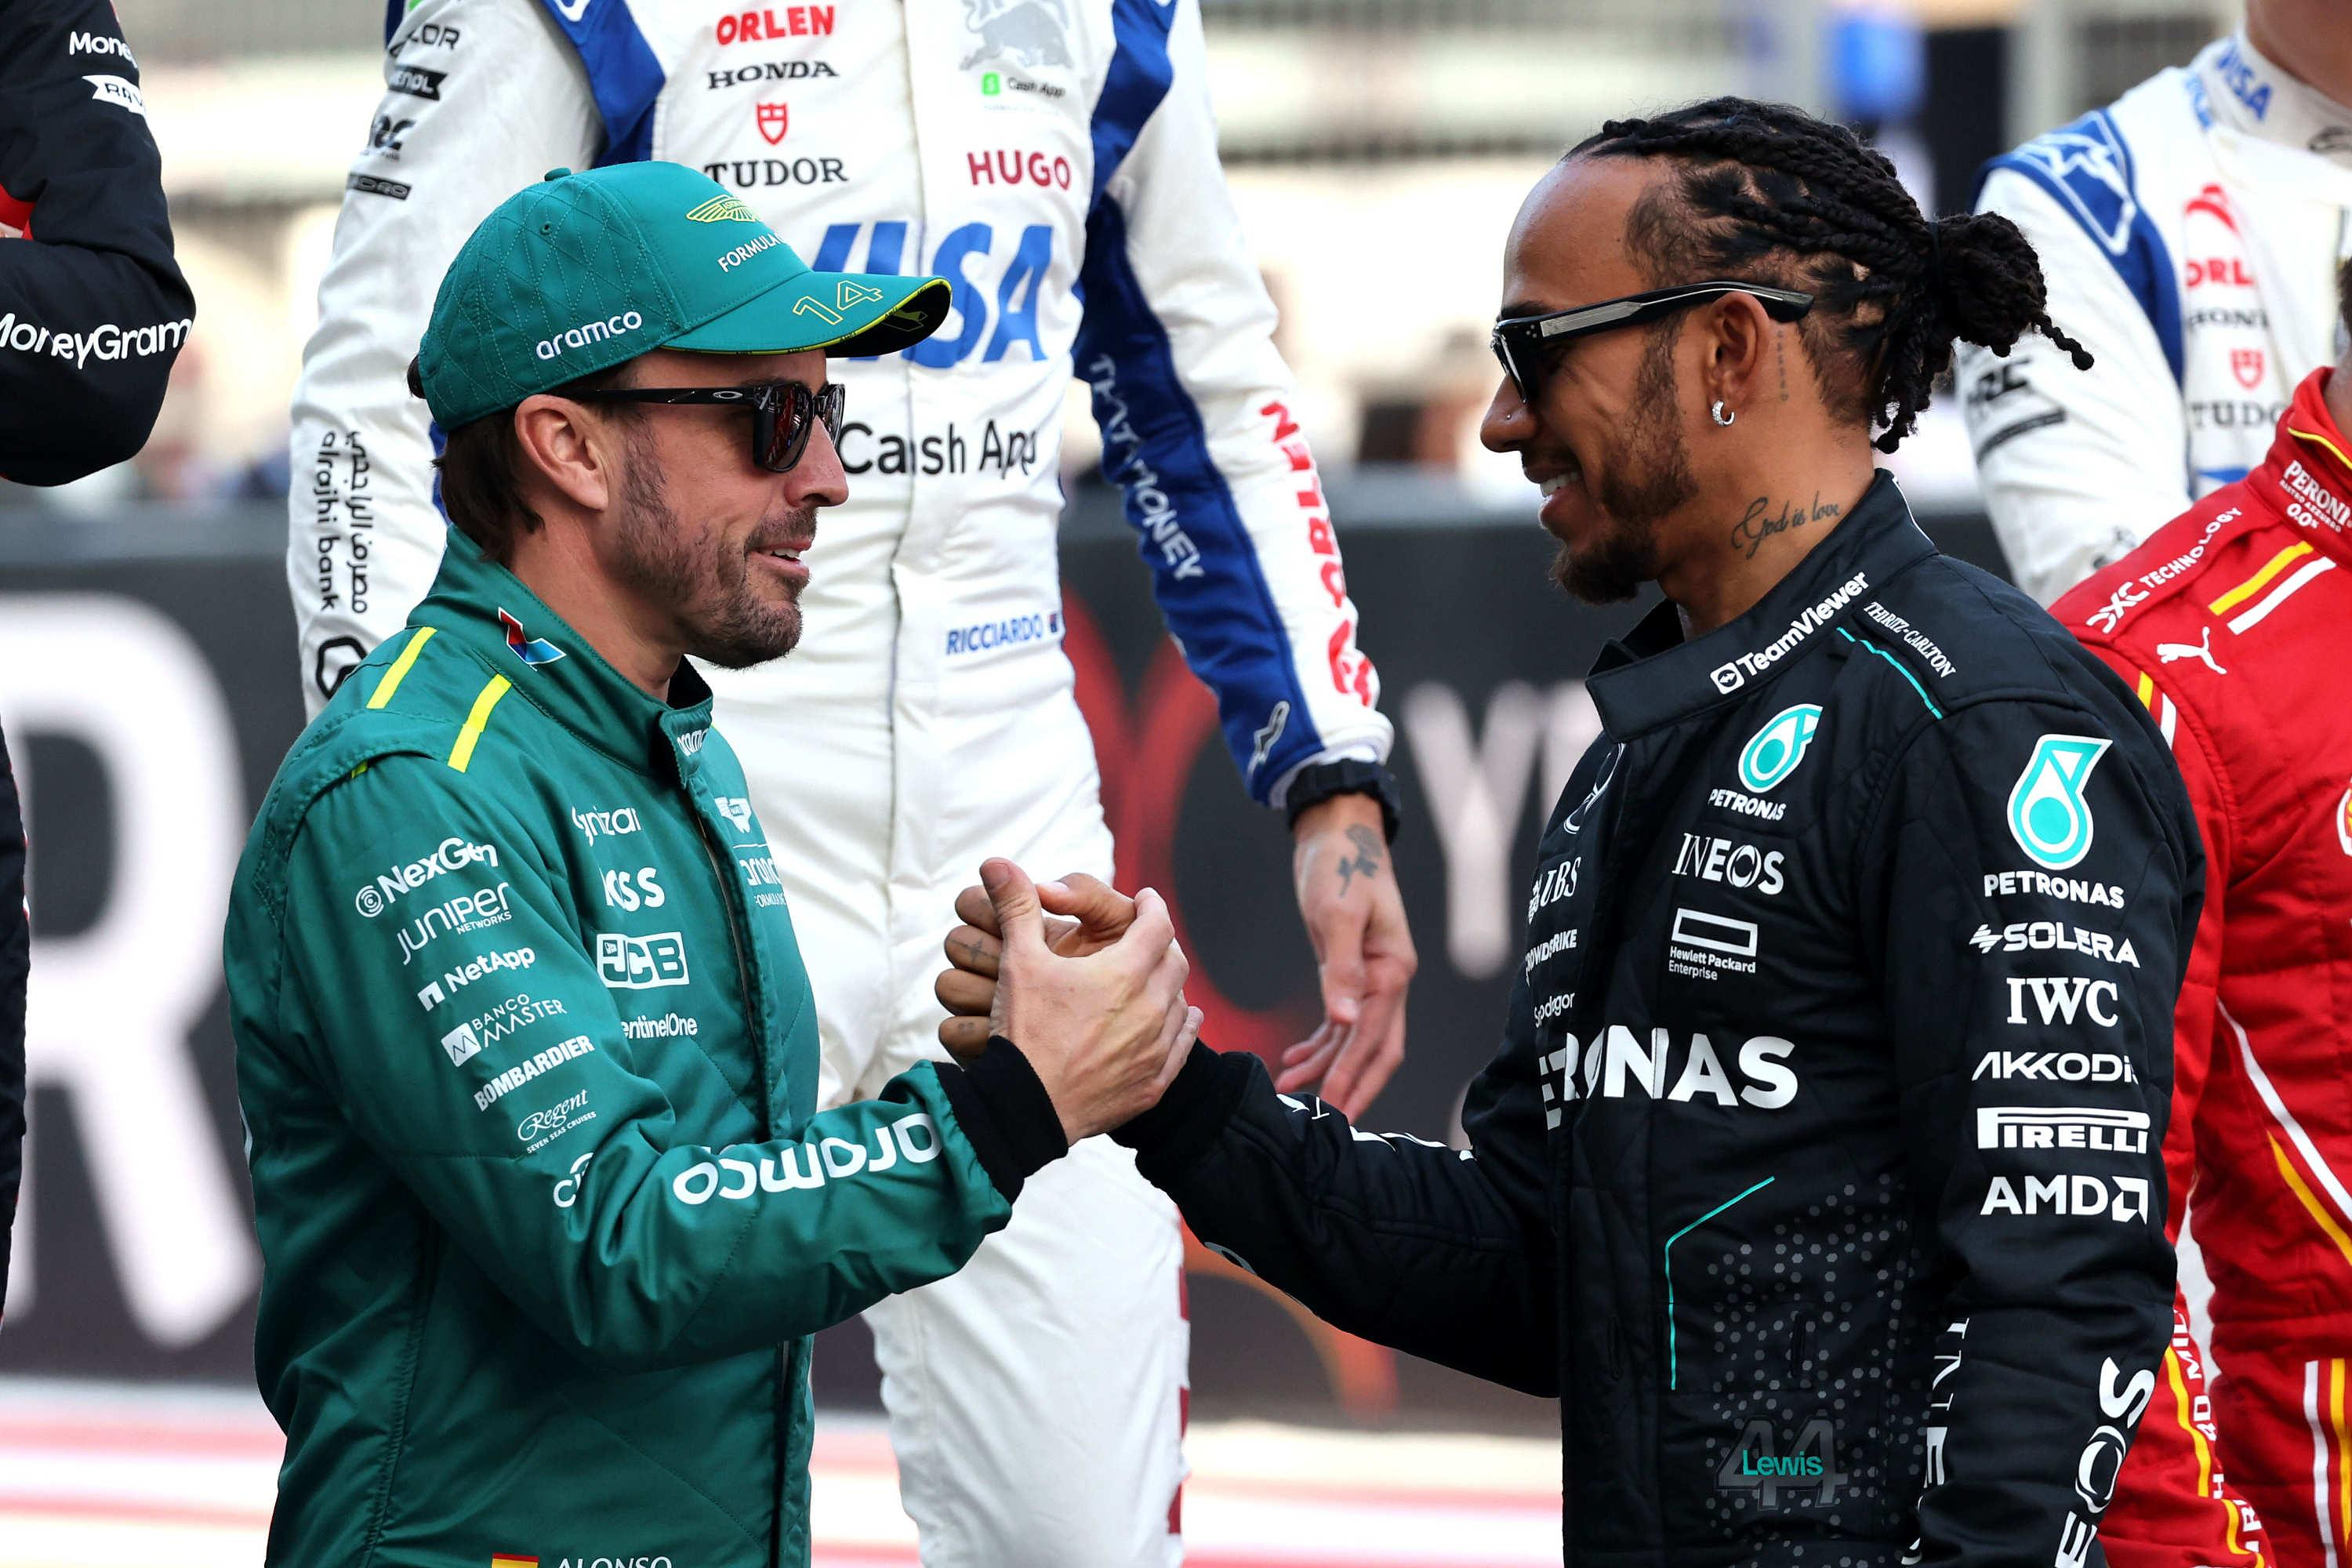 Mercedes: “Fernando is the man for the job,” says Formula 1 technical director Pat Symonds